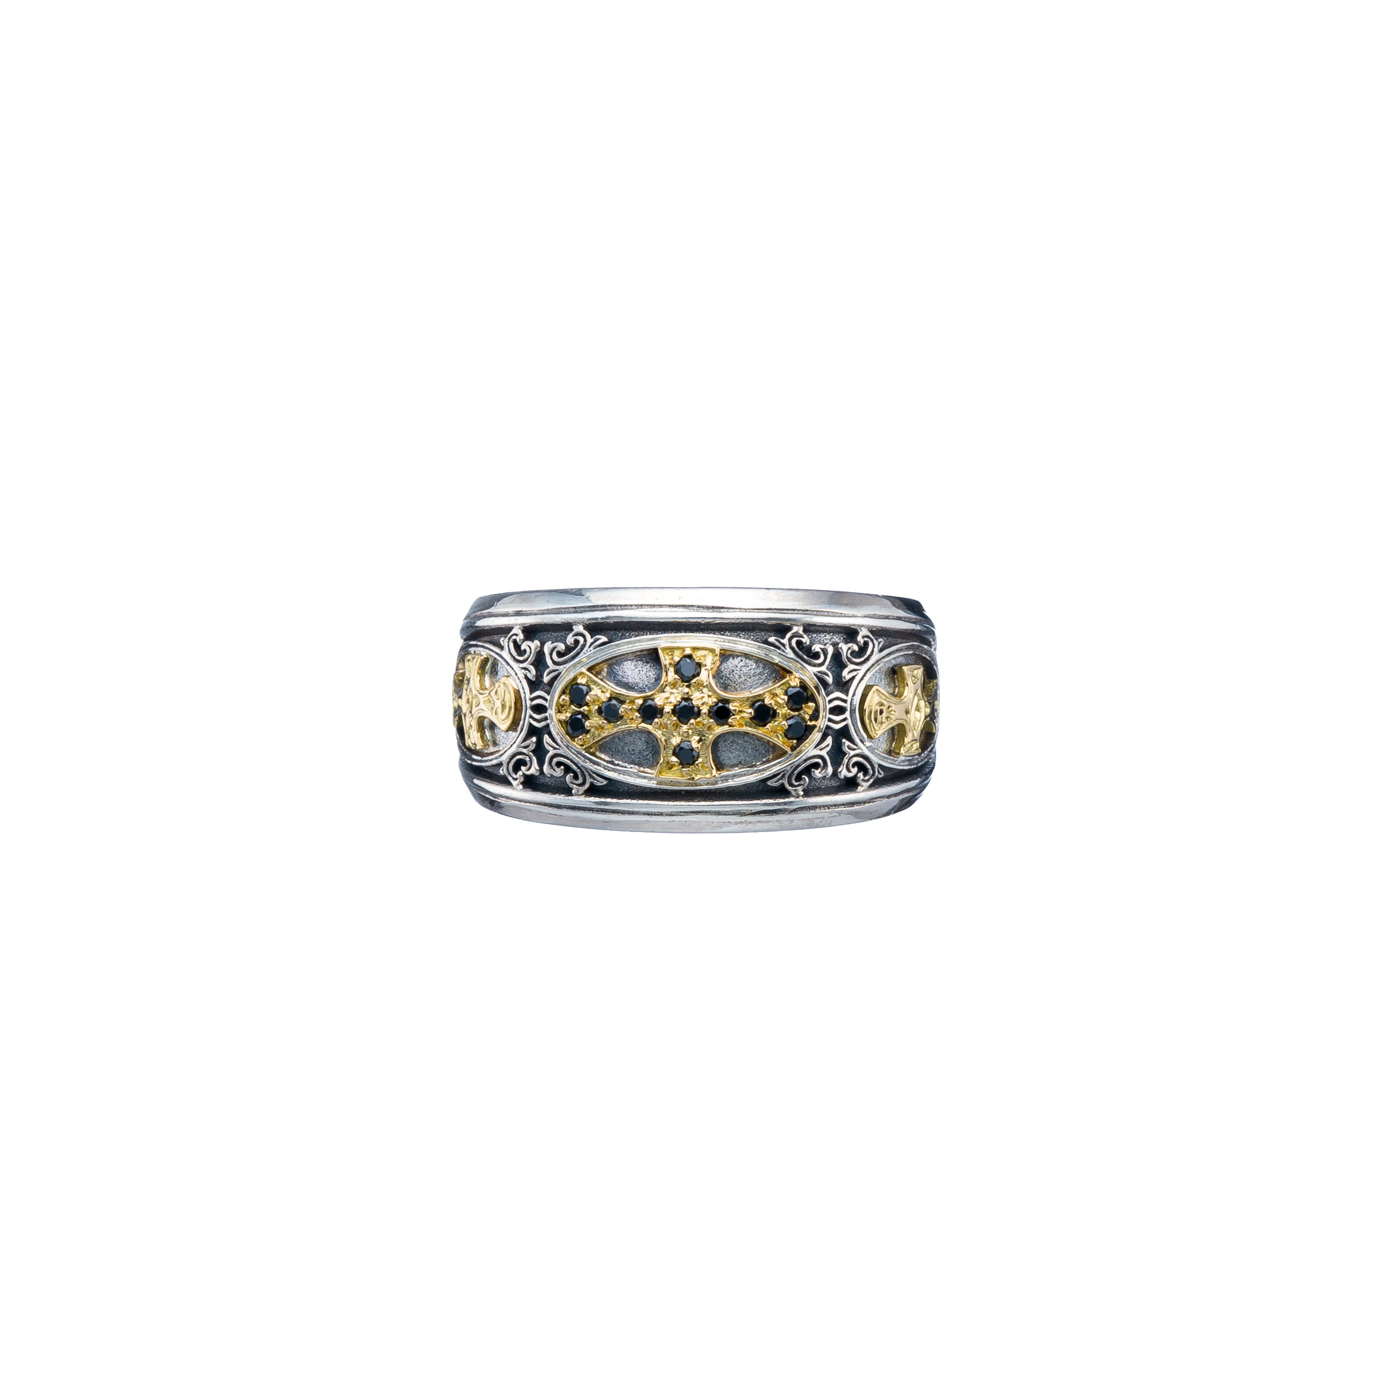 Patmos Ring in 18K Gold and Sterling silver with black diamonds